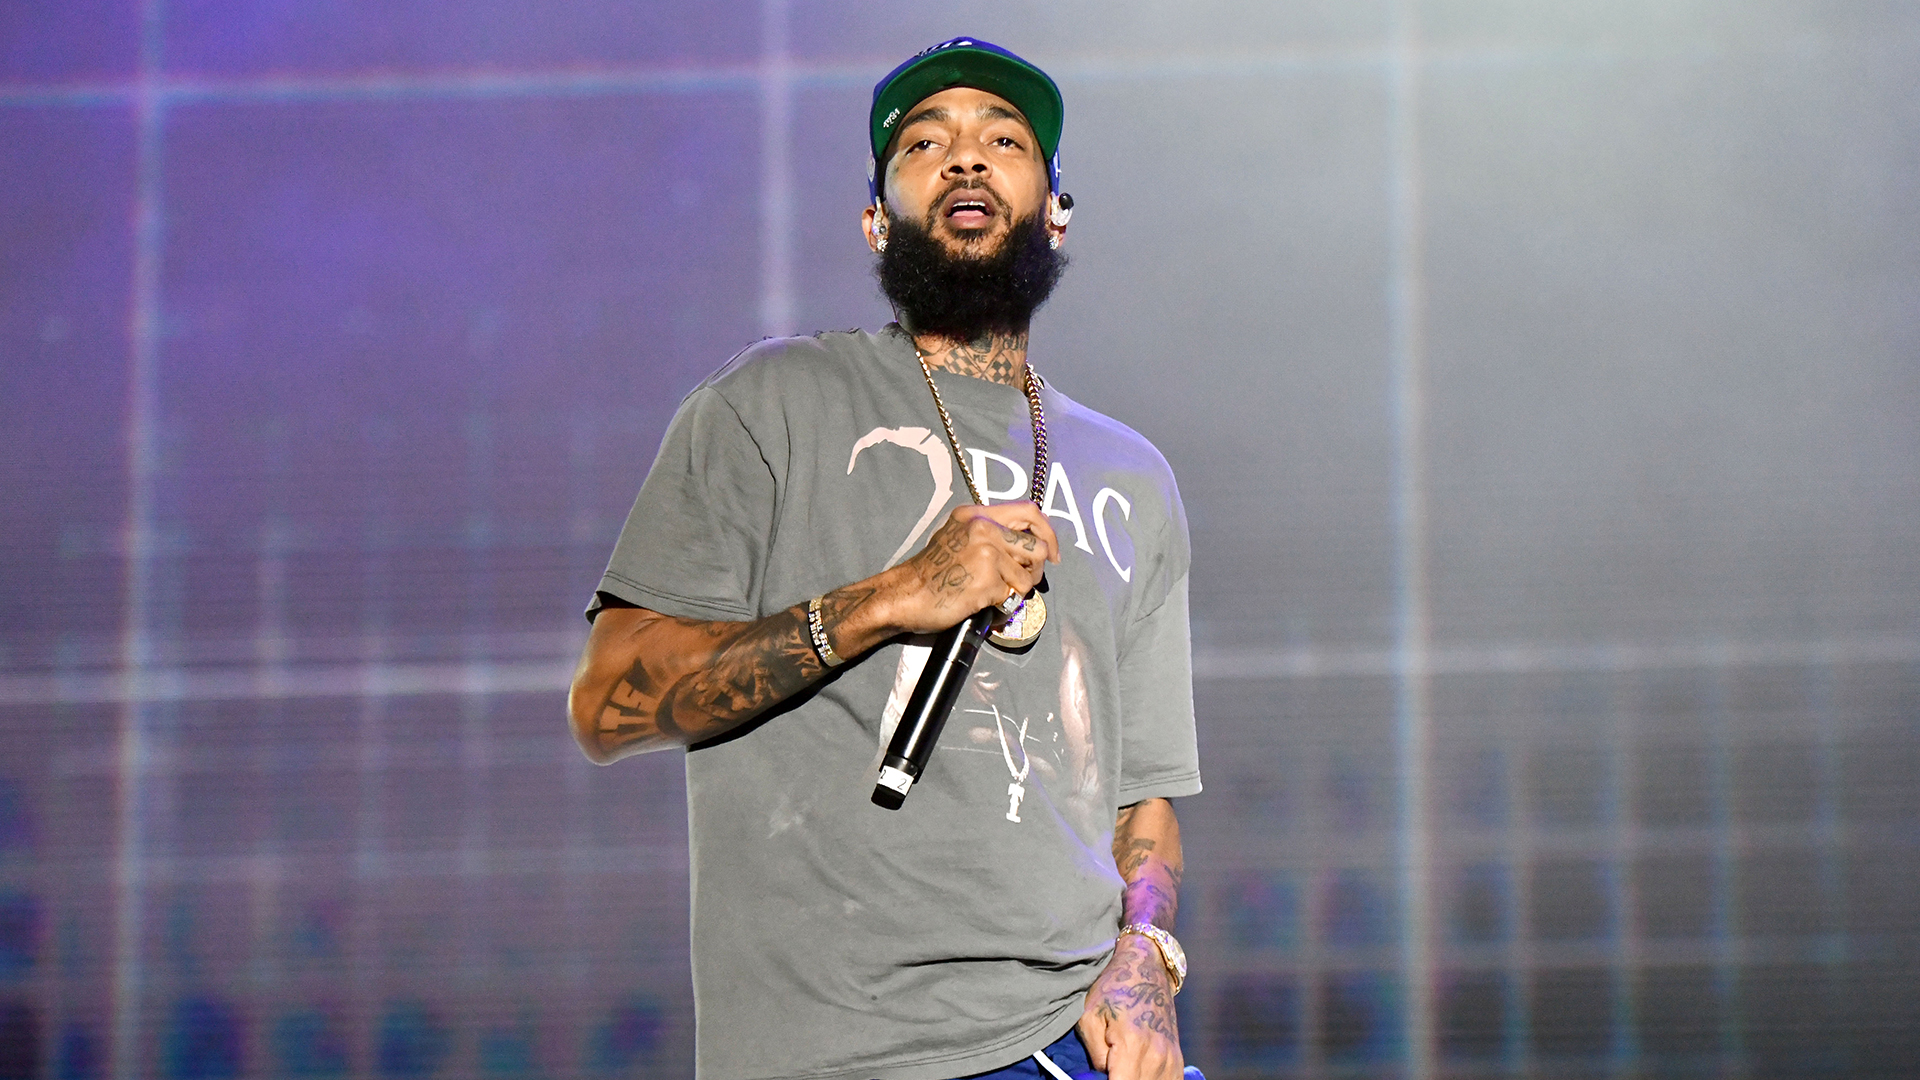 LAPD Used Predictive Policing Technology To Target Nipsey Hussle And His Businesses, Report Says